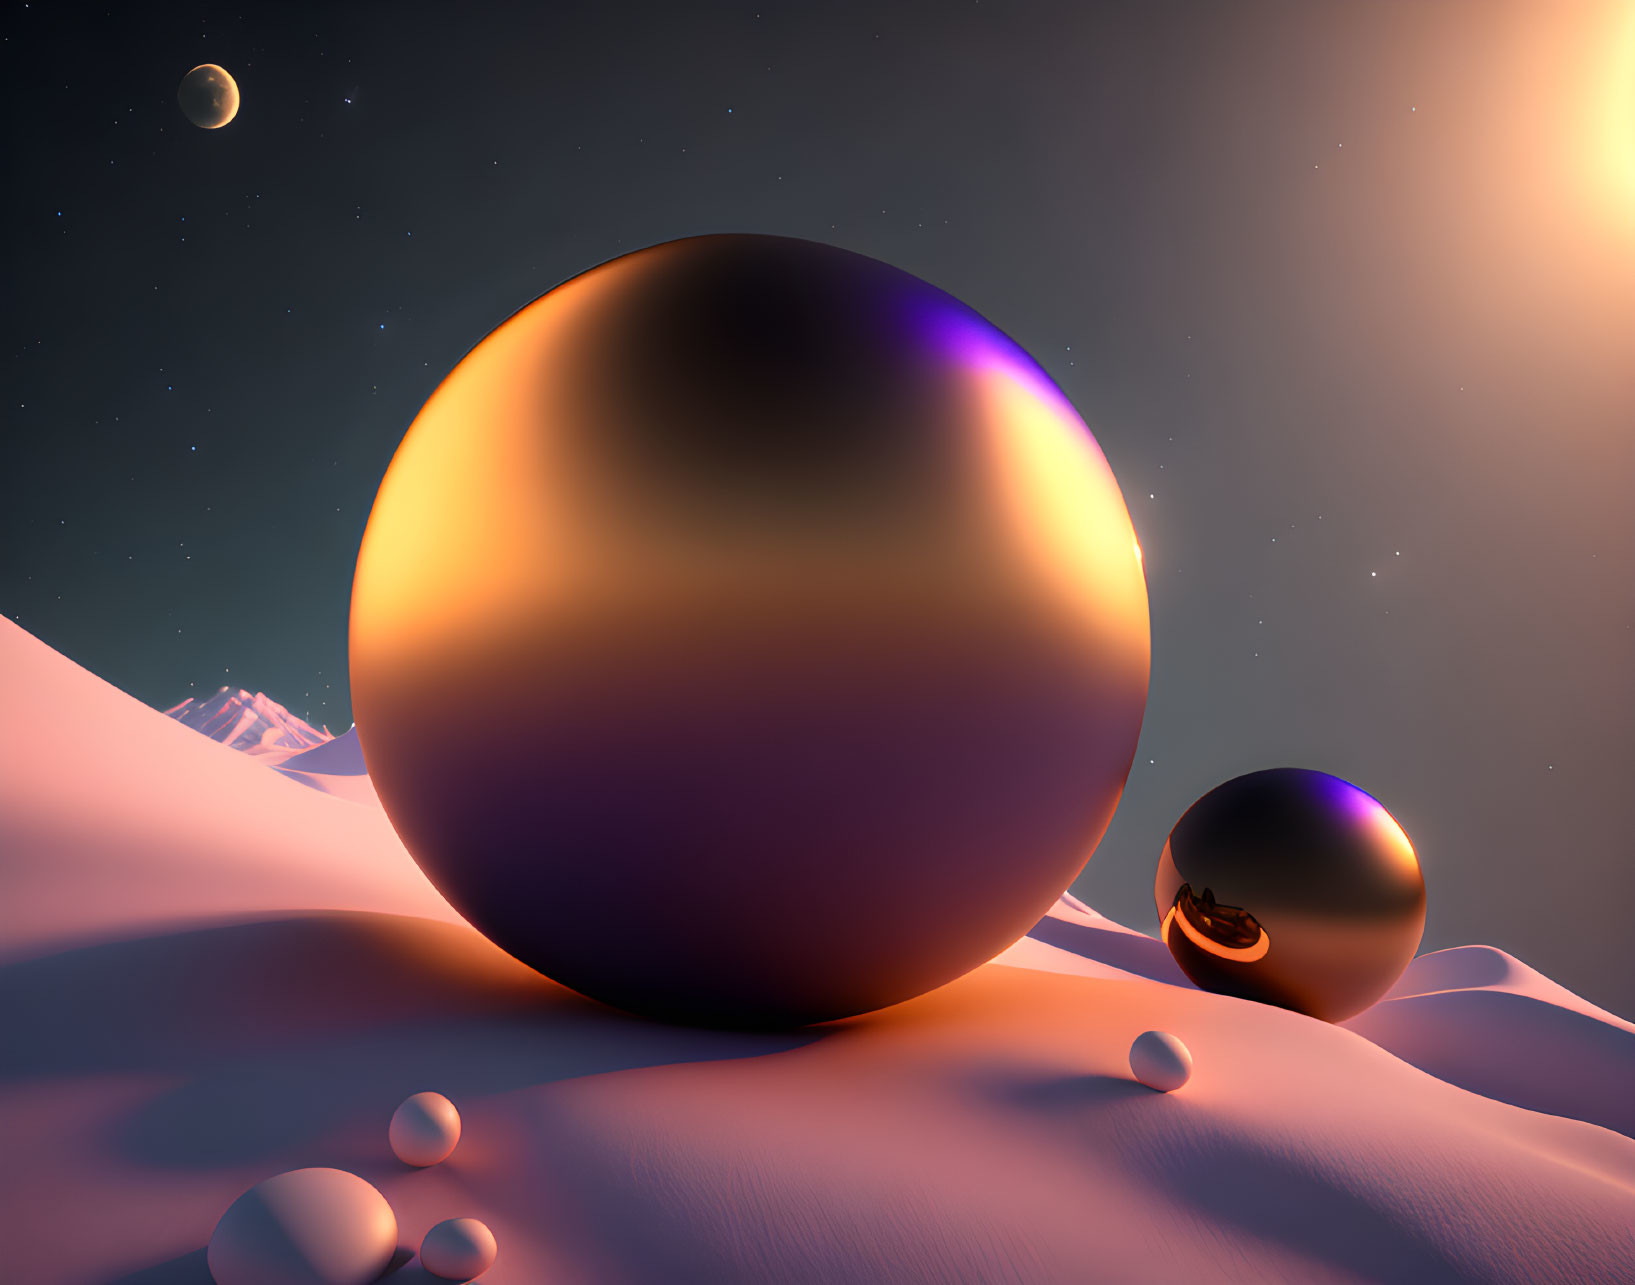 Surreal landscape with shiny golden spheres on sandy terrain